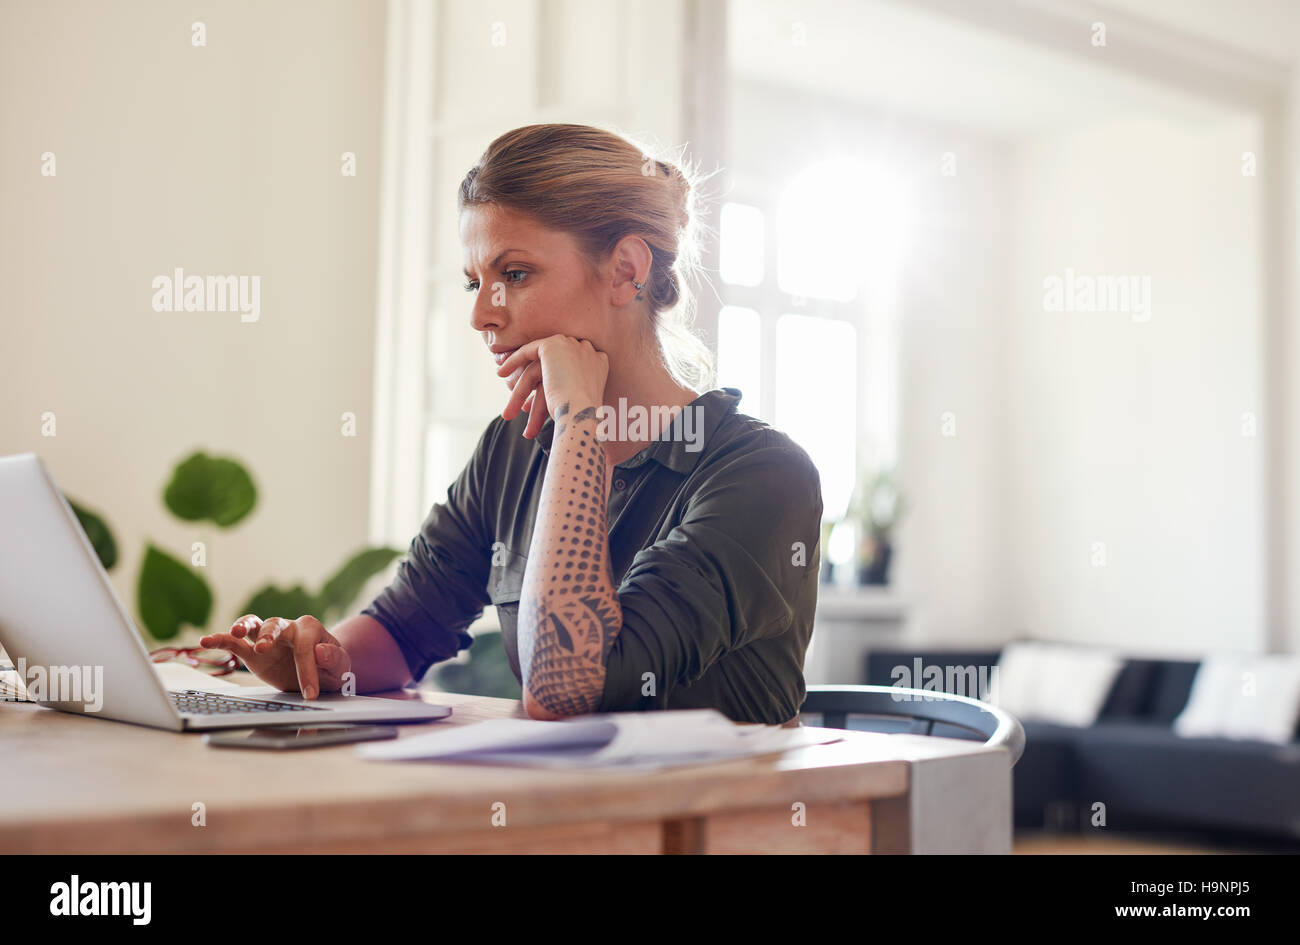 Portrait of beautiful young woman sitting at home office using laptop. Female looking busy working on laptop. Stock Photo